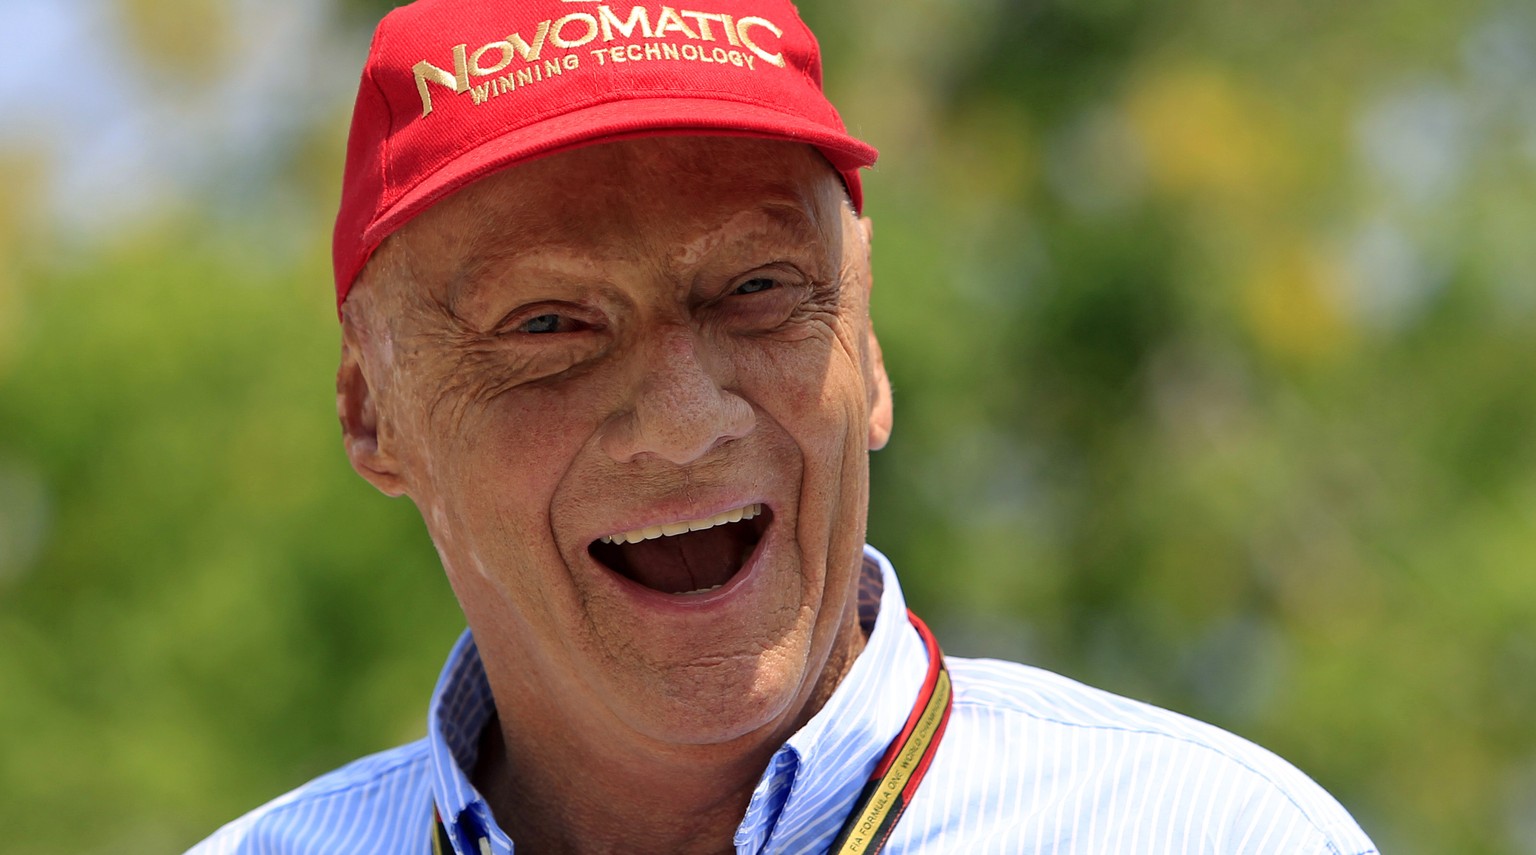 Former Formula One driver Niki Lauda of Austria laughs as he arrives at the paddock before the Malaysian Formula One Grand Prix at Sepang International Circuit in Sepang, Malaysia, Sunday, March 30, 2 ...